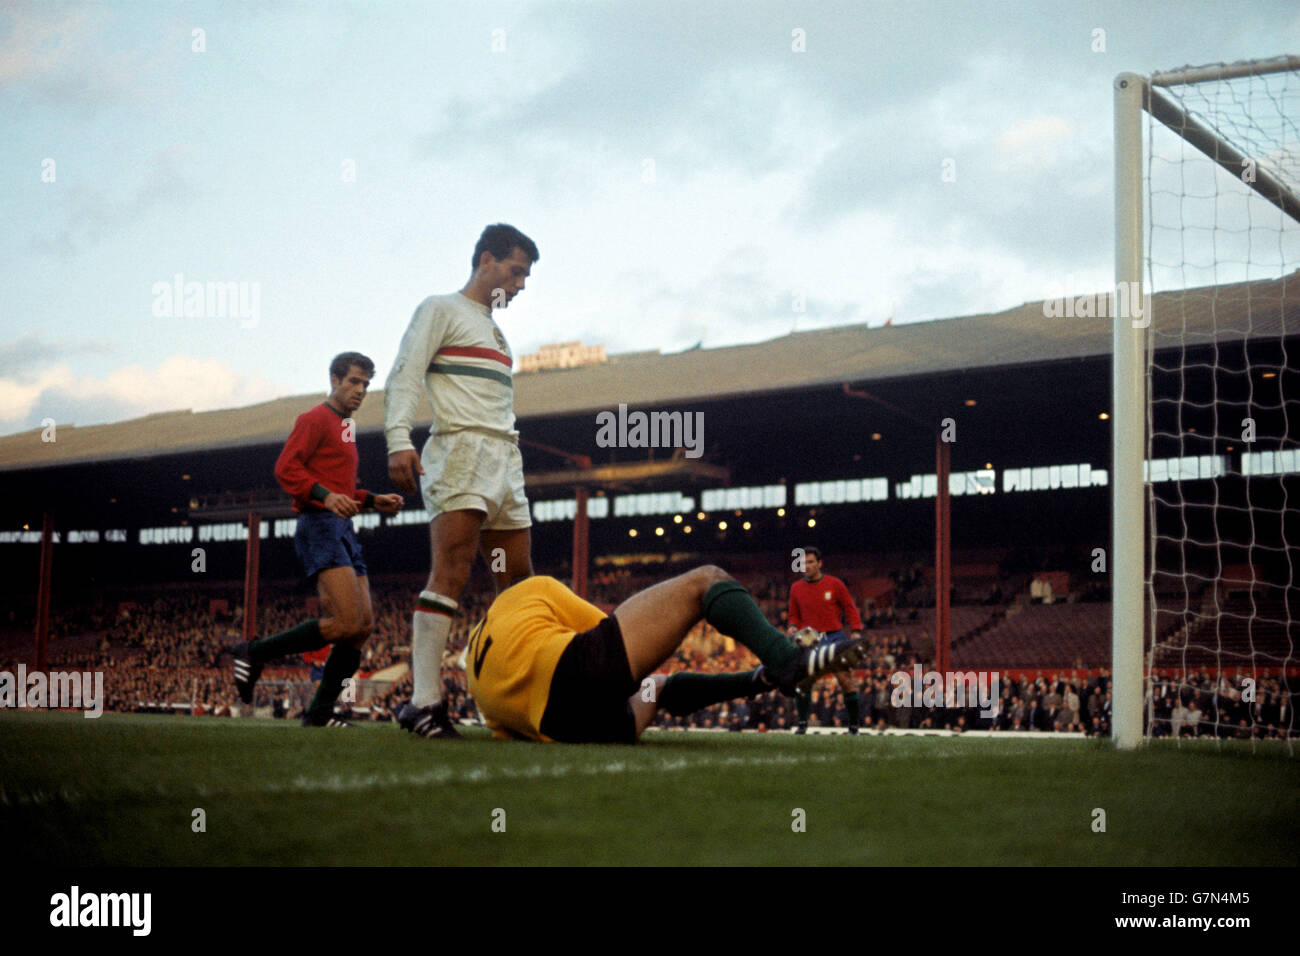 Football - Coupe du Monde Angleterre 1966 - Groupe 3 - Portugal / Hongrie Banque D'Images